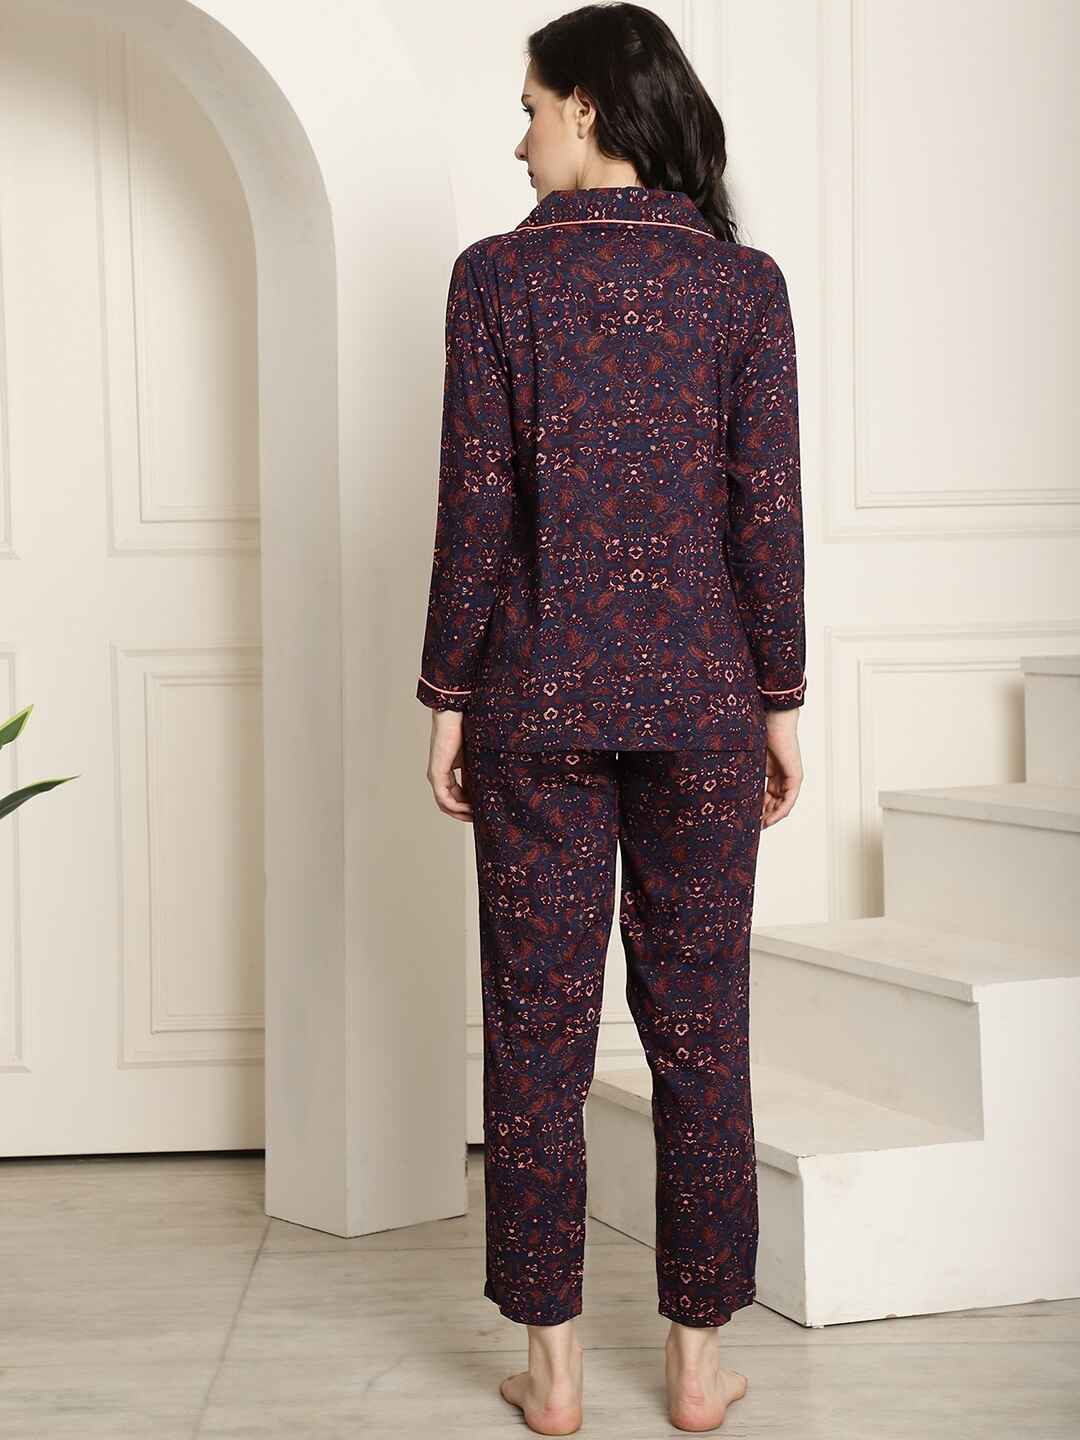 Blue Color Floral Printed Cotton Nightsuit For Night Suit Claura Designs Pvt. Ltd. Nightsuit blue, Floral, Full Sleeves, long sleeves, Nightsuit, Printed, Rayon, Sleepwear